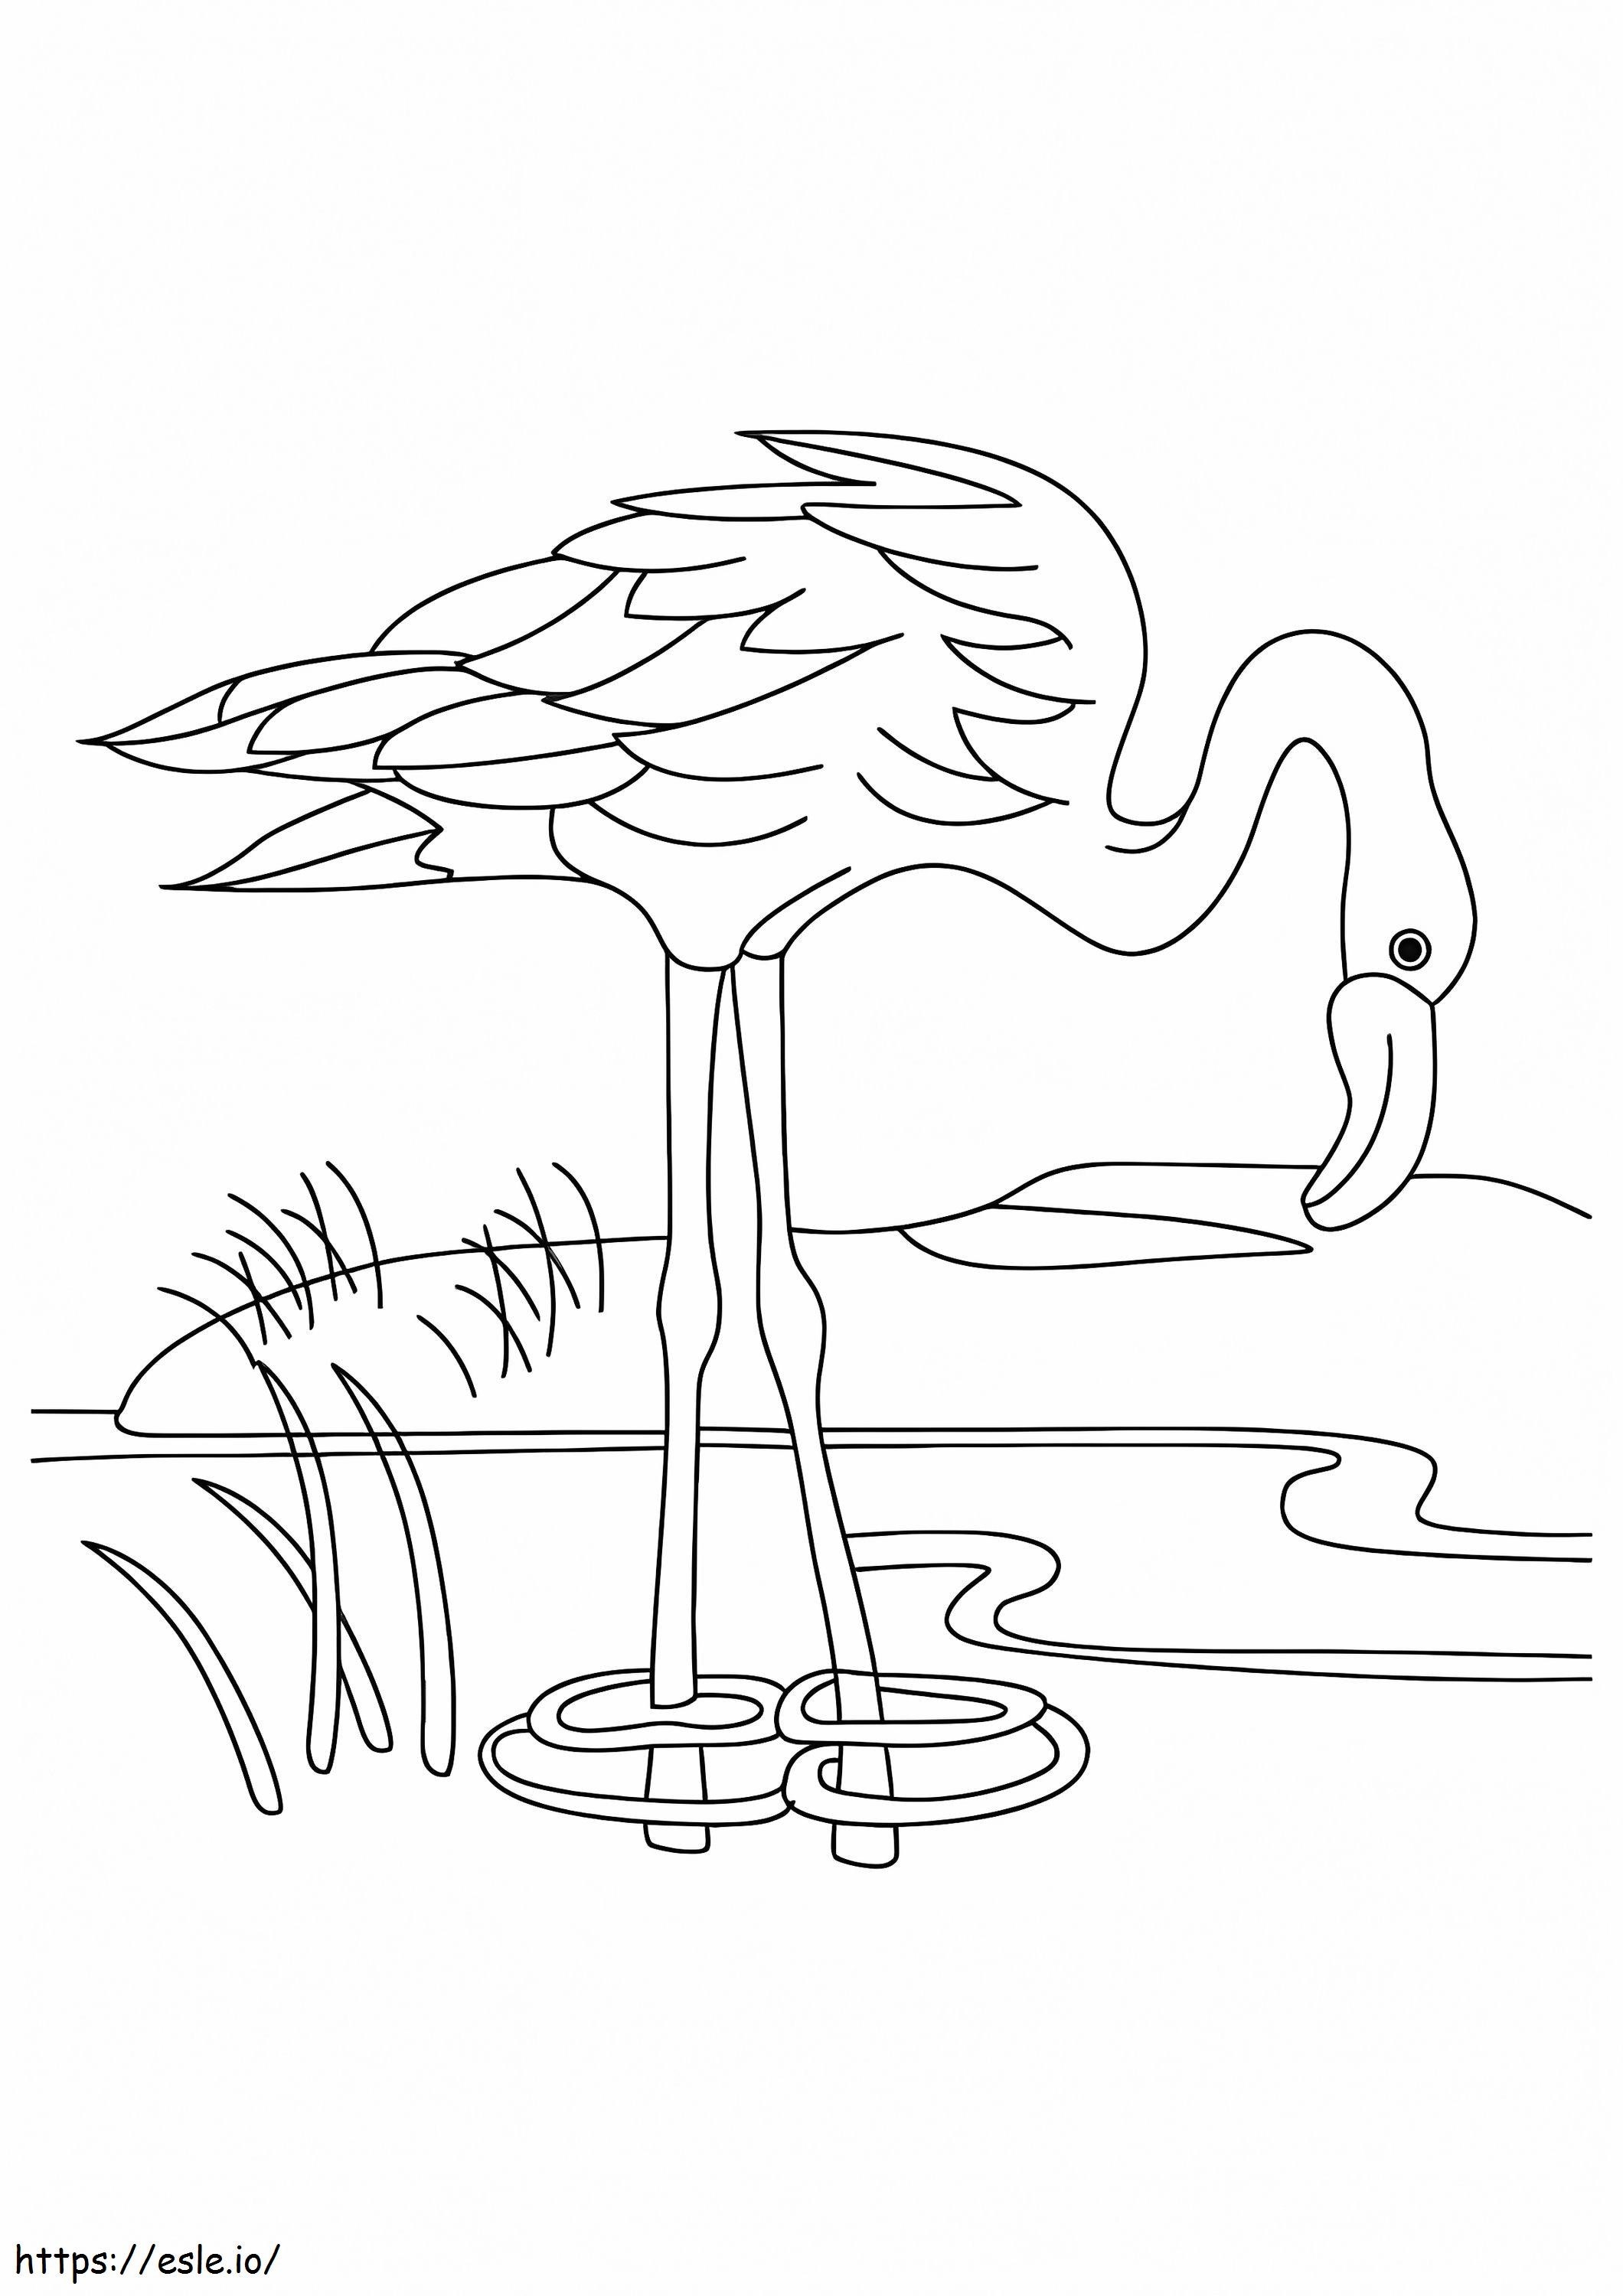 A Flamingo Drinking Water coloring page